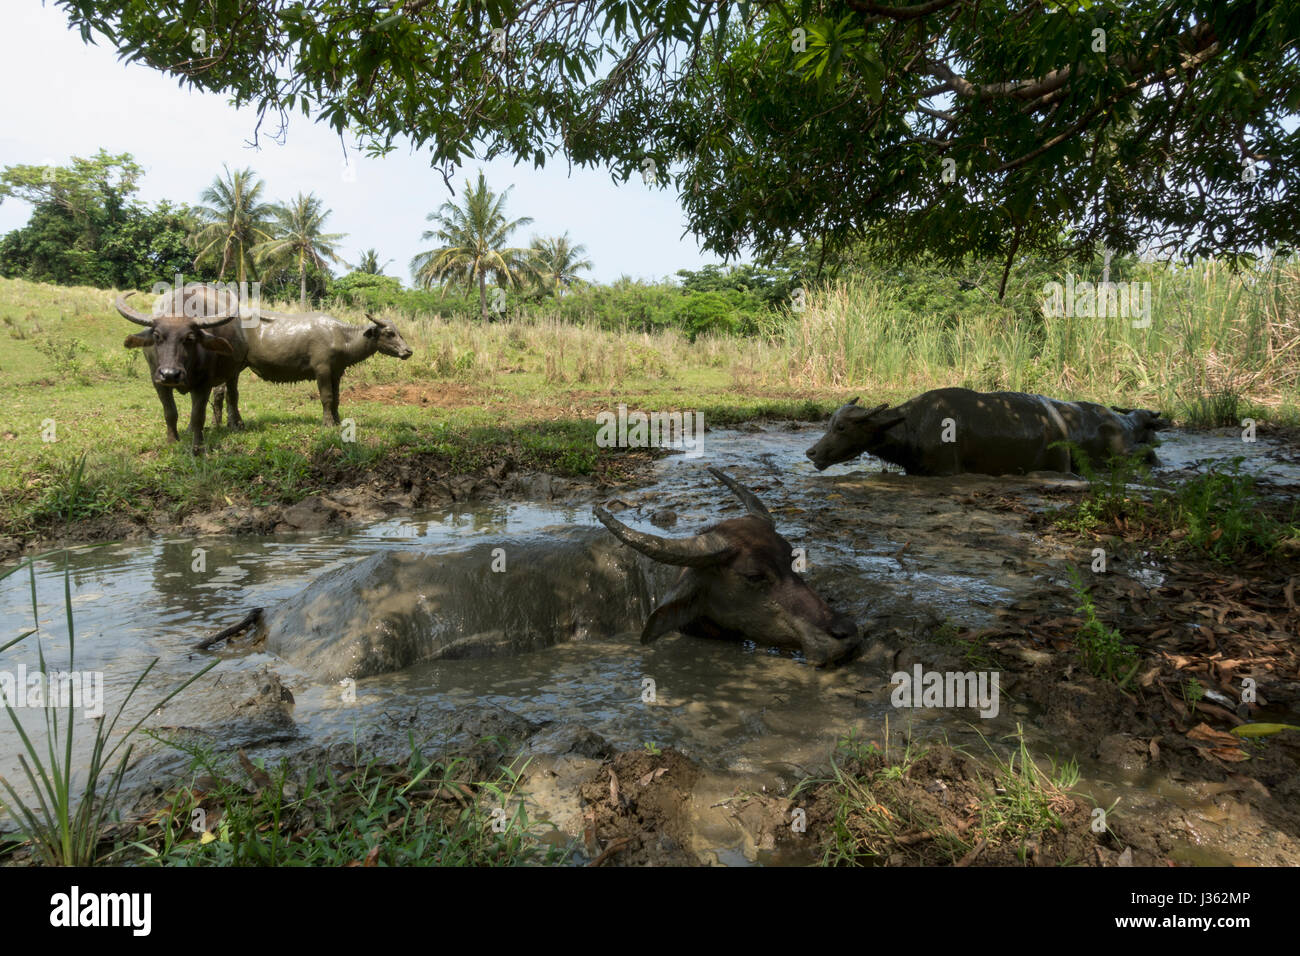 Polillo Island, Philippines - April 30, 2017: Carabaos resting under the shade on the Pandanan Island in the Philippines. Stock Photo